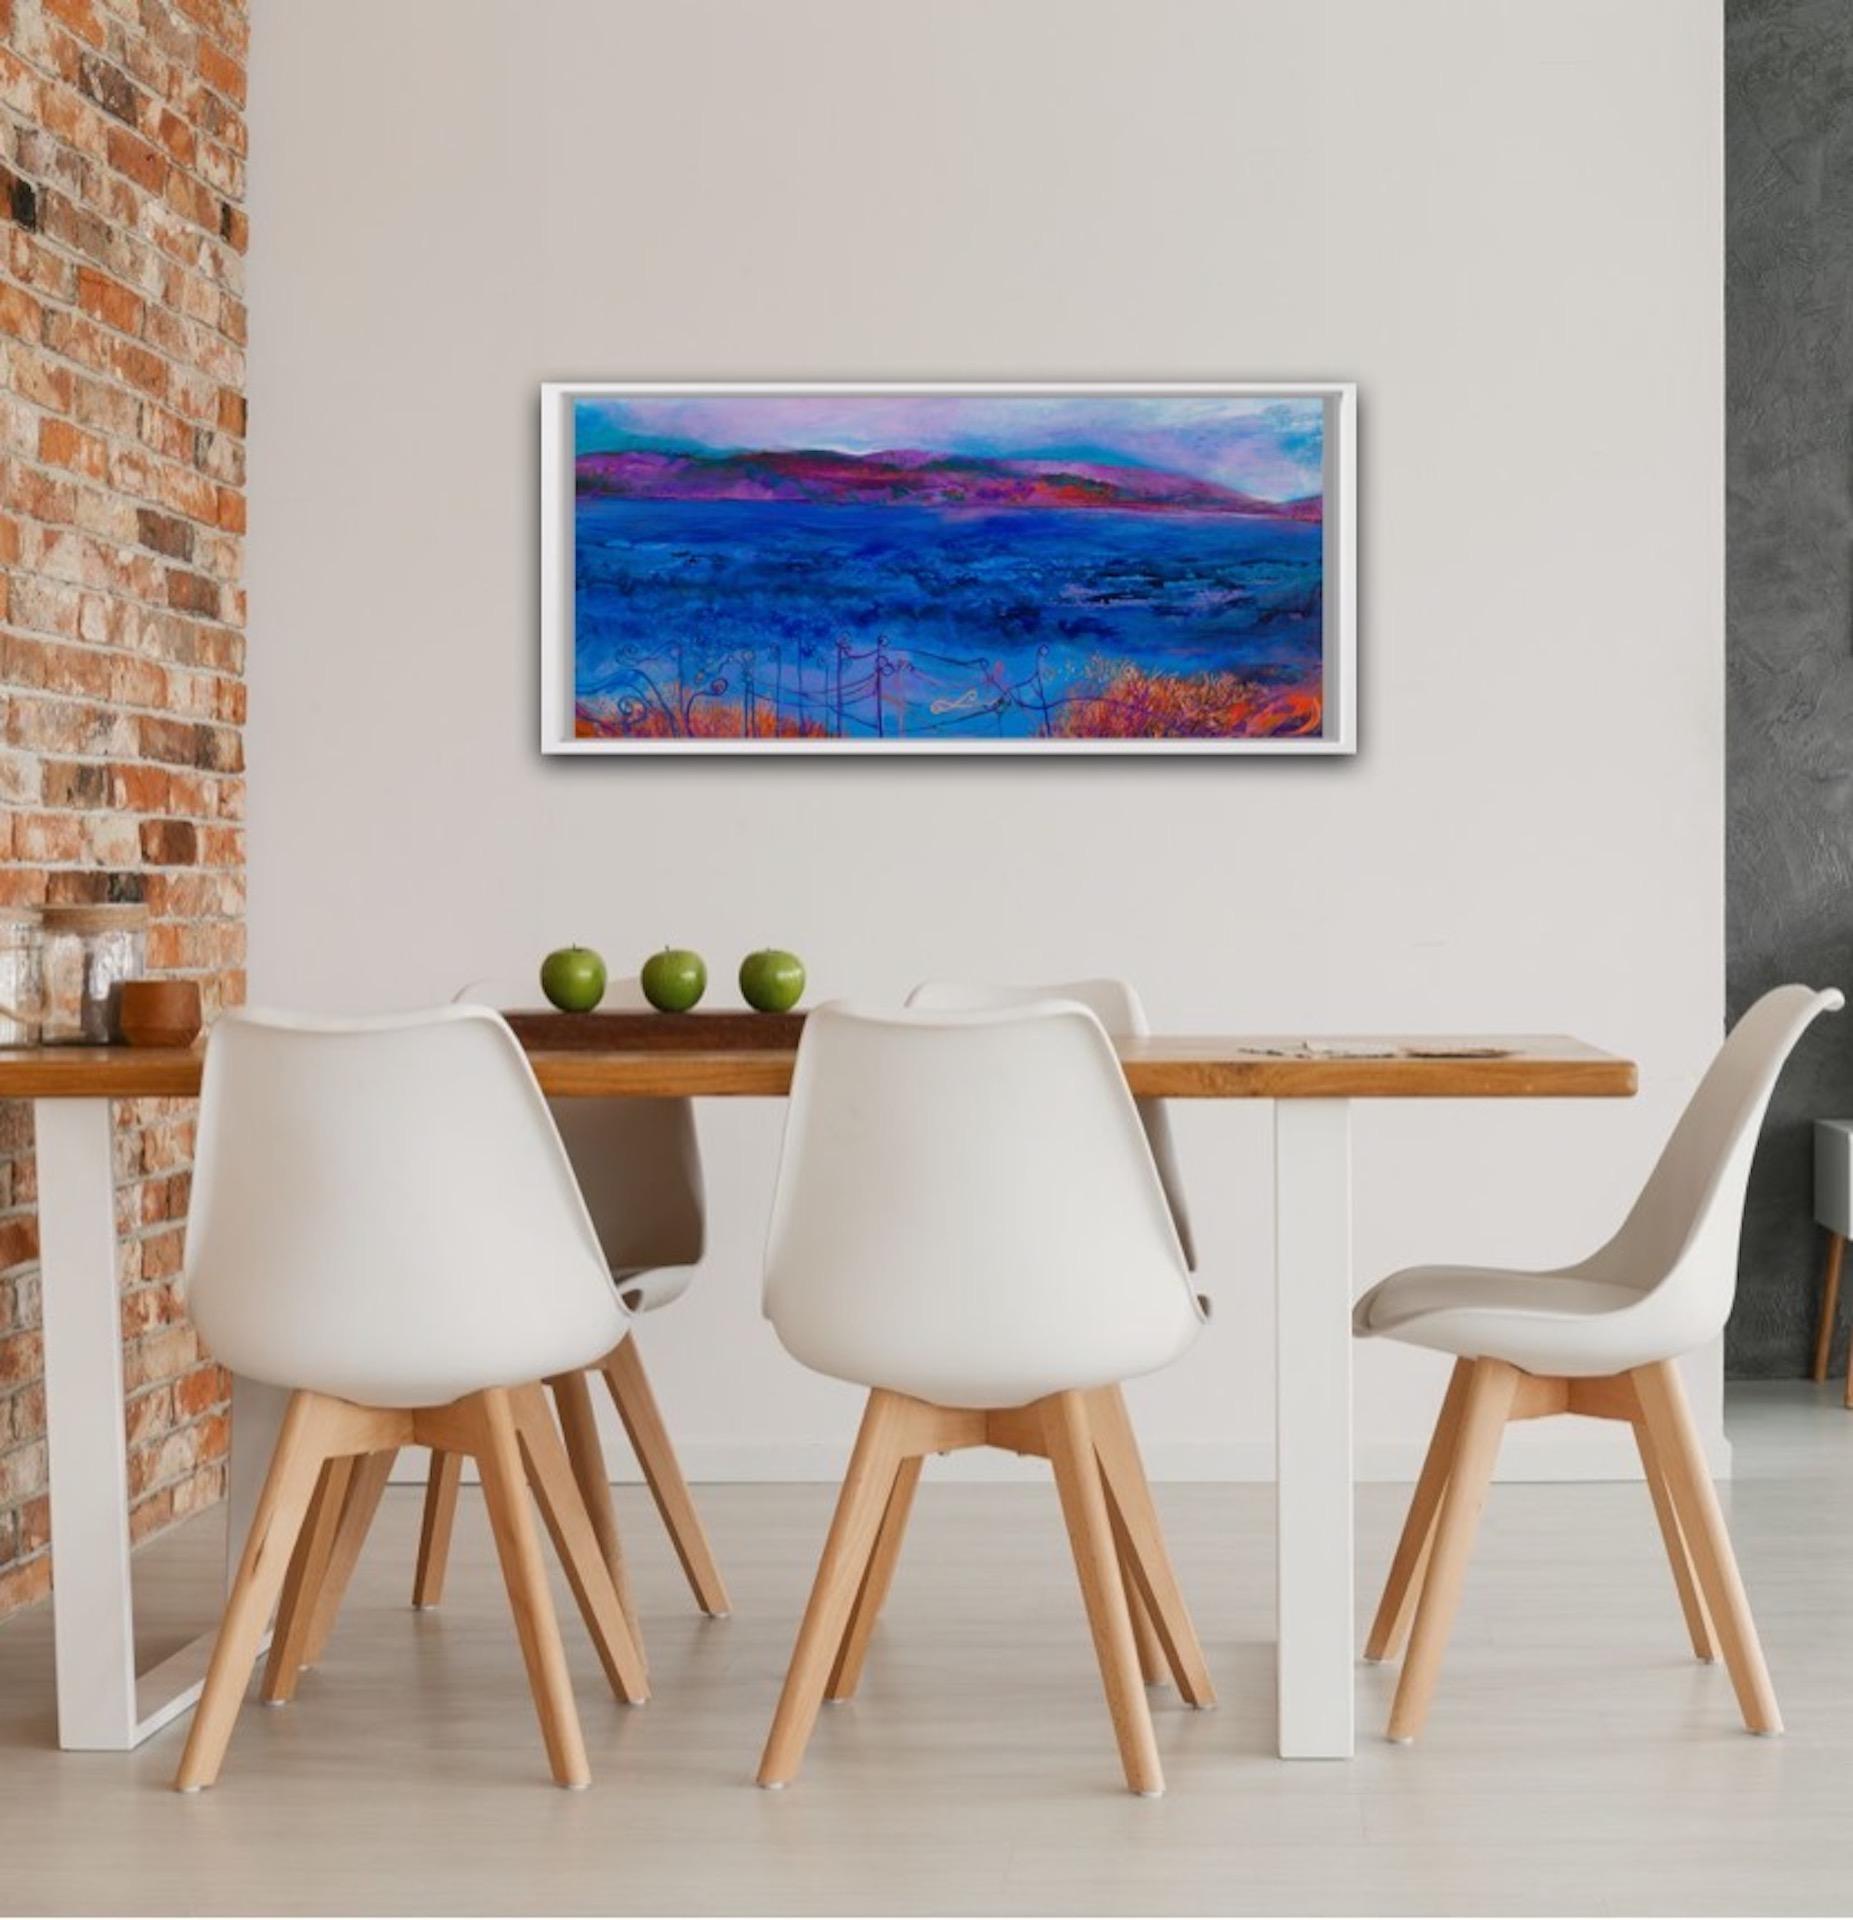 Jan Gardener
Farewell My Lovley
Original Abstract Painting
Acrylic on Canvas
Size: H 44cm x W 106cm
Sold in a White Wood Frame
(Please note that in situ images are purely an indication of how a piece may look).

I love to wander along the coastal